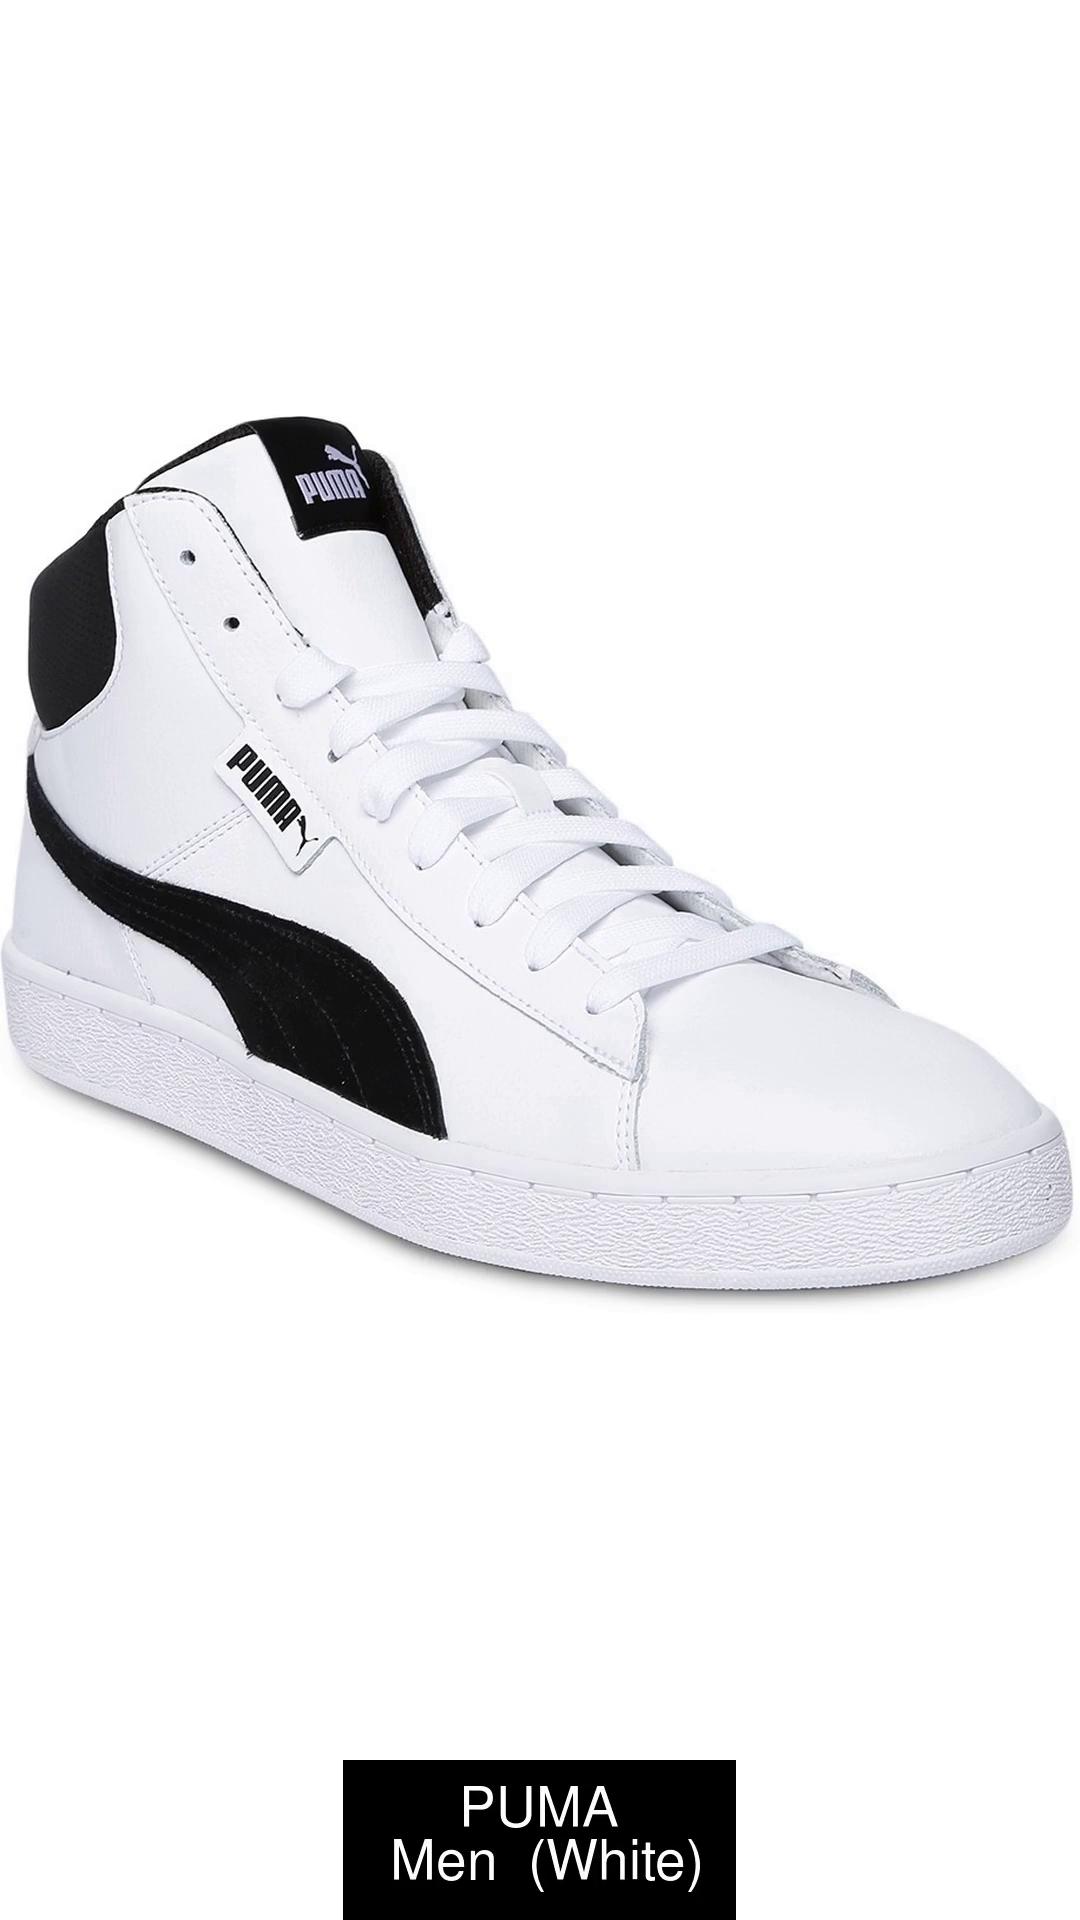 PUMA Mid L Sneakers For Men - Buy PUMA 1948 Mid L Sneakers For Online at Best Price - Shop Online for Footwears India | Flipkart.com